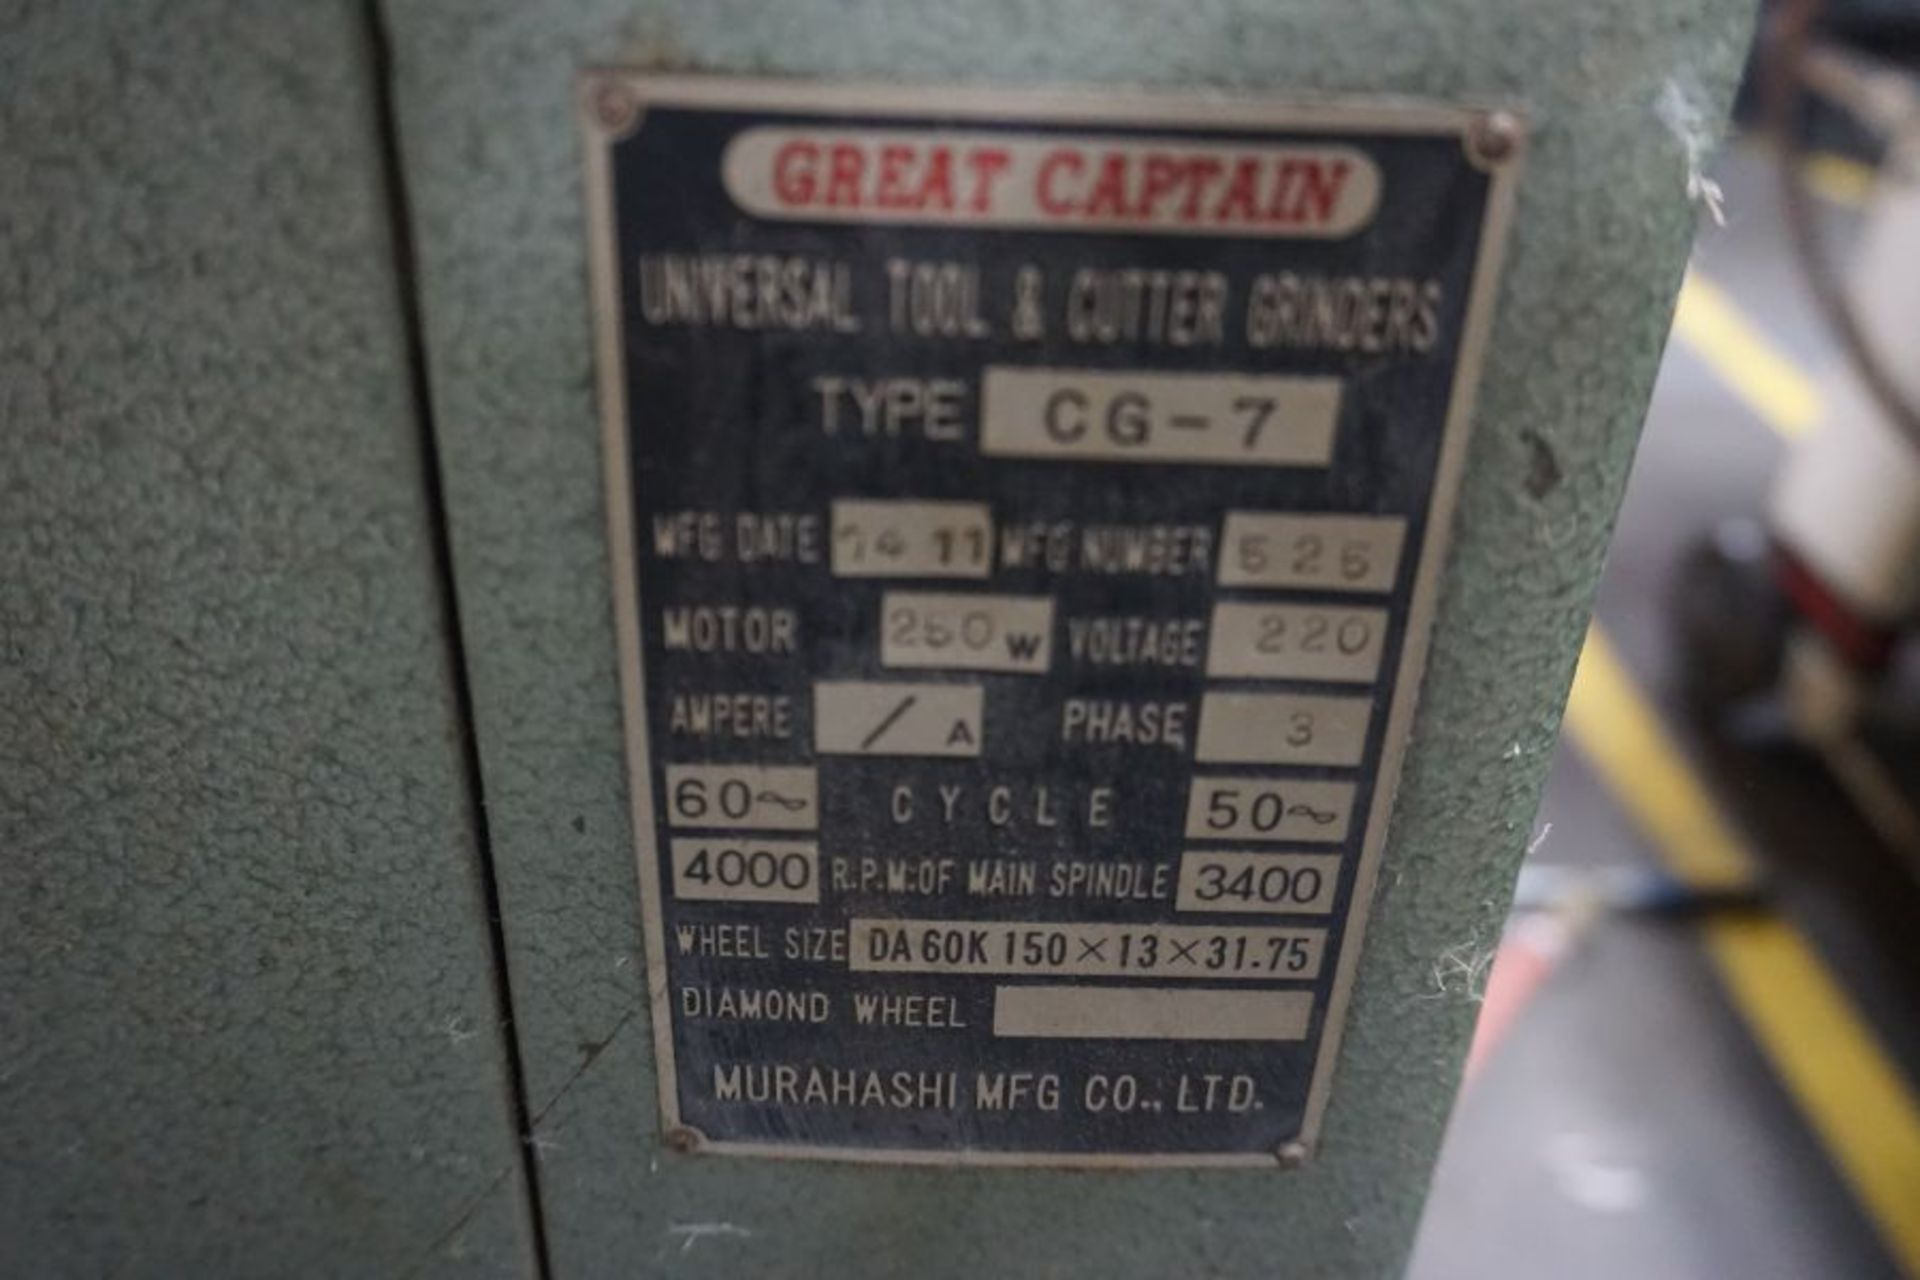 Great Captain CG-7 Tool Cutter Grinder, s/n 525 - Image 4 of 4